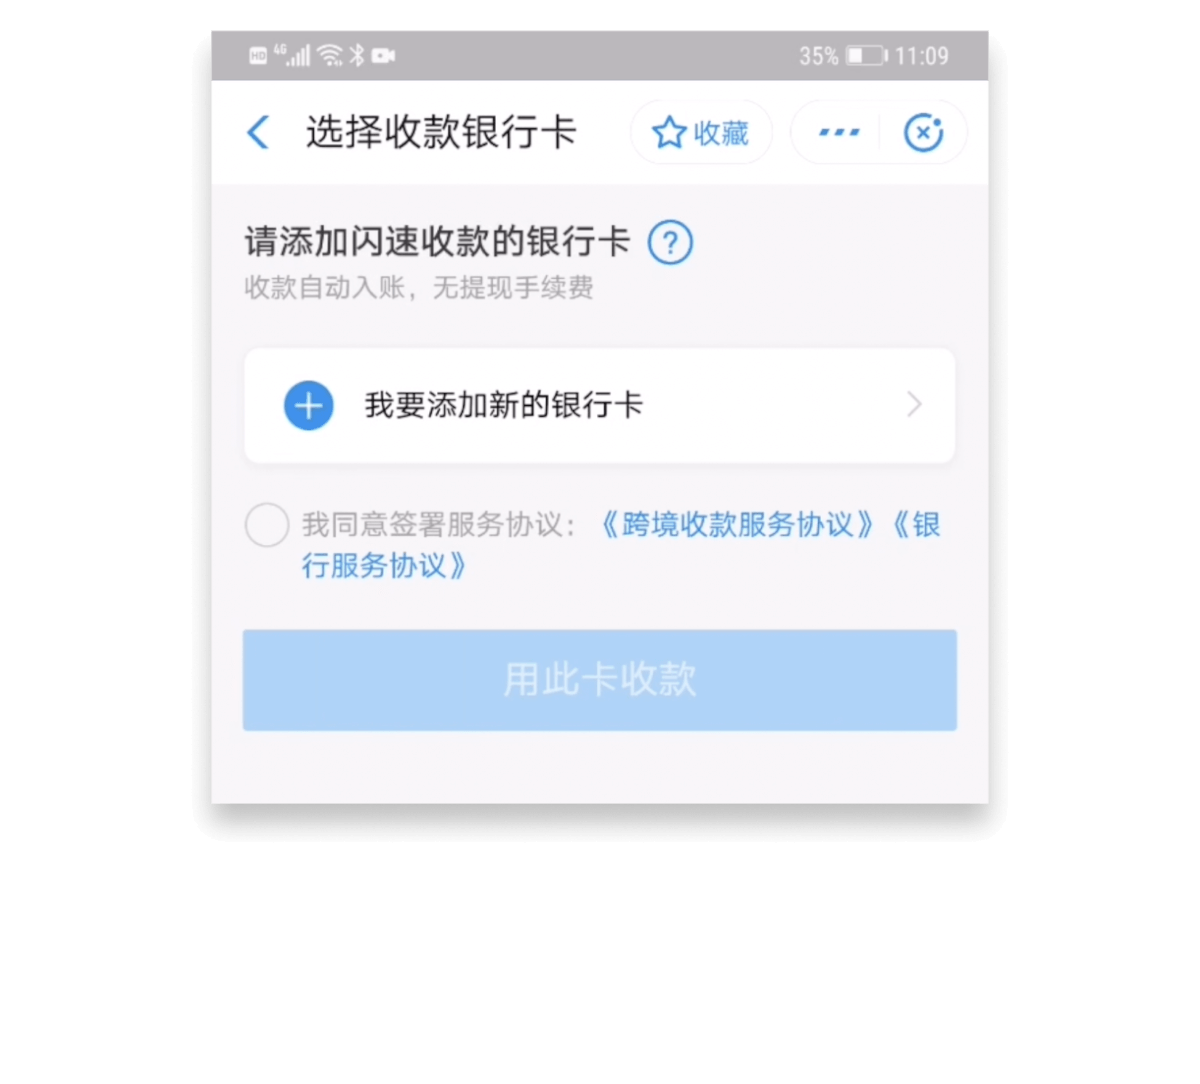 Choose a bank card to link to Alipay